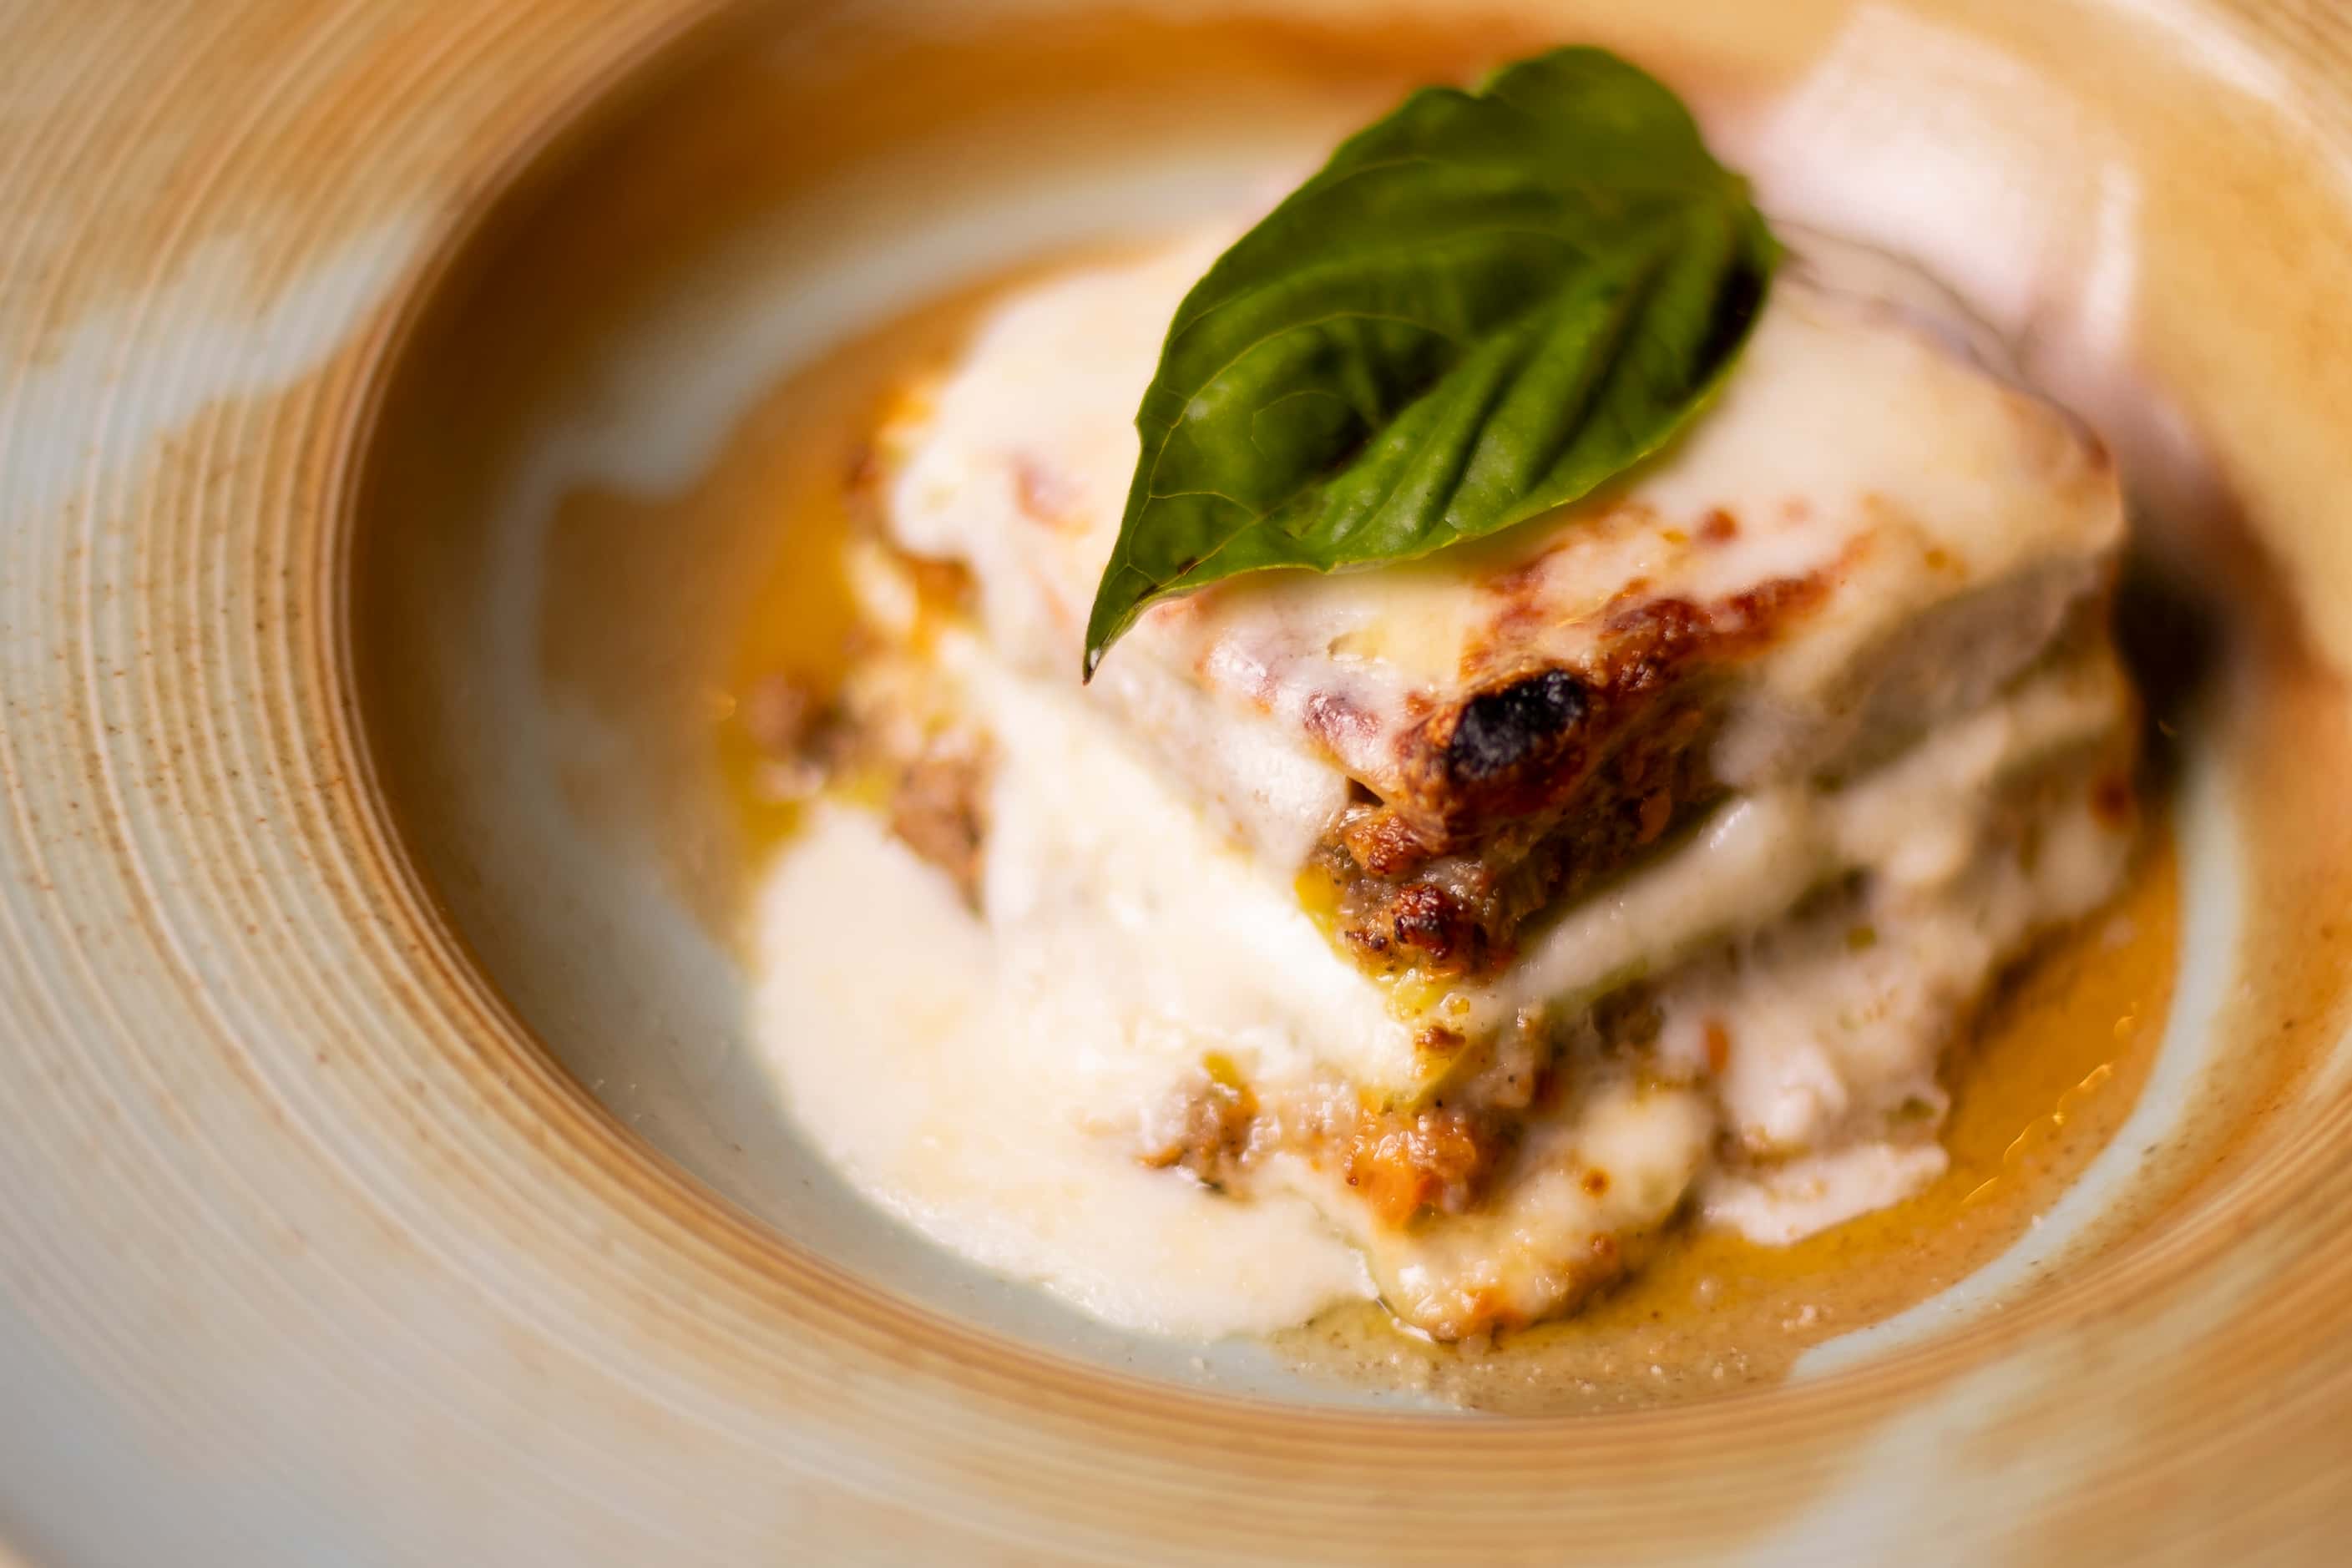 The Lasagna Blanca is made with spinach pasta, white bolognese, béchamel, sage, parmesan and...